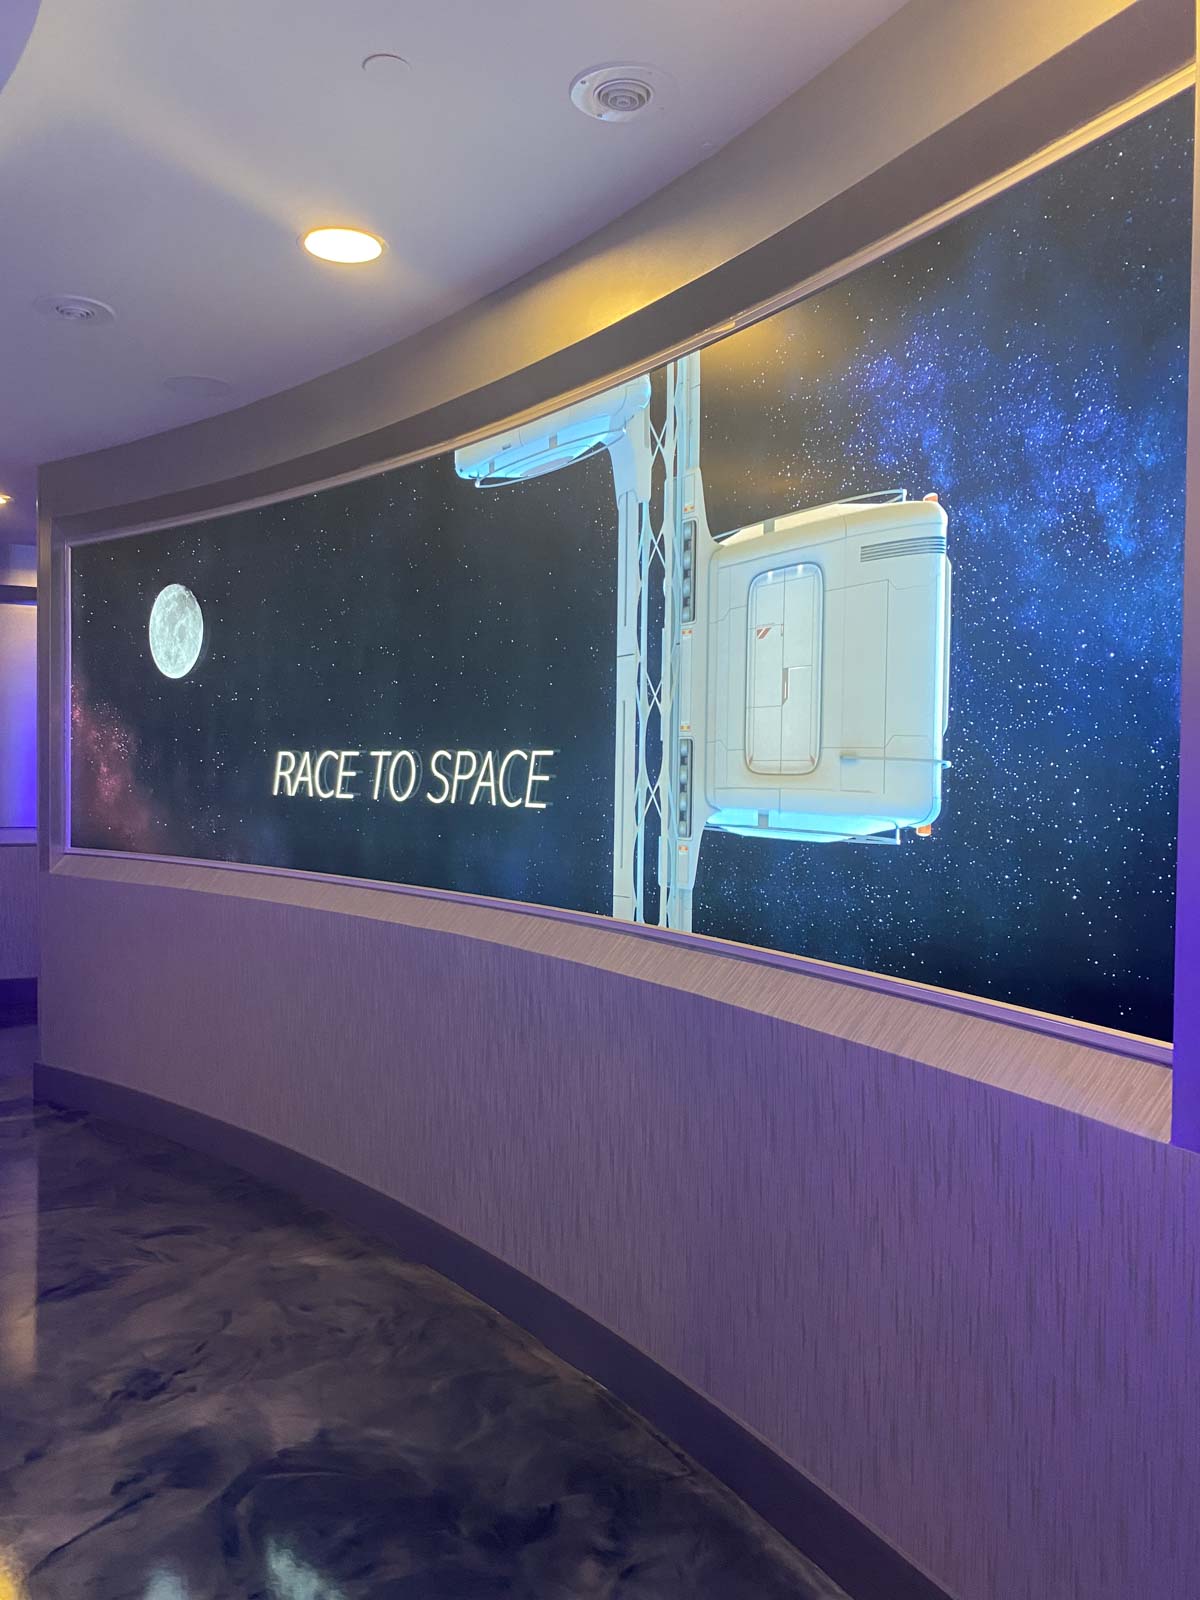 Space 220 posters in waiting area